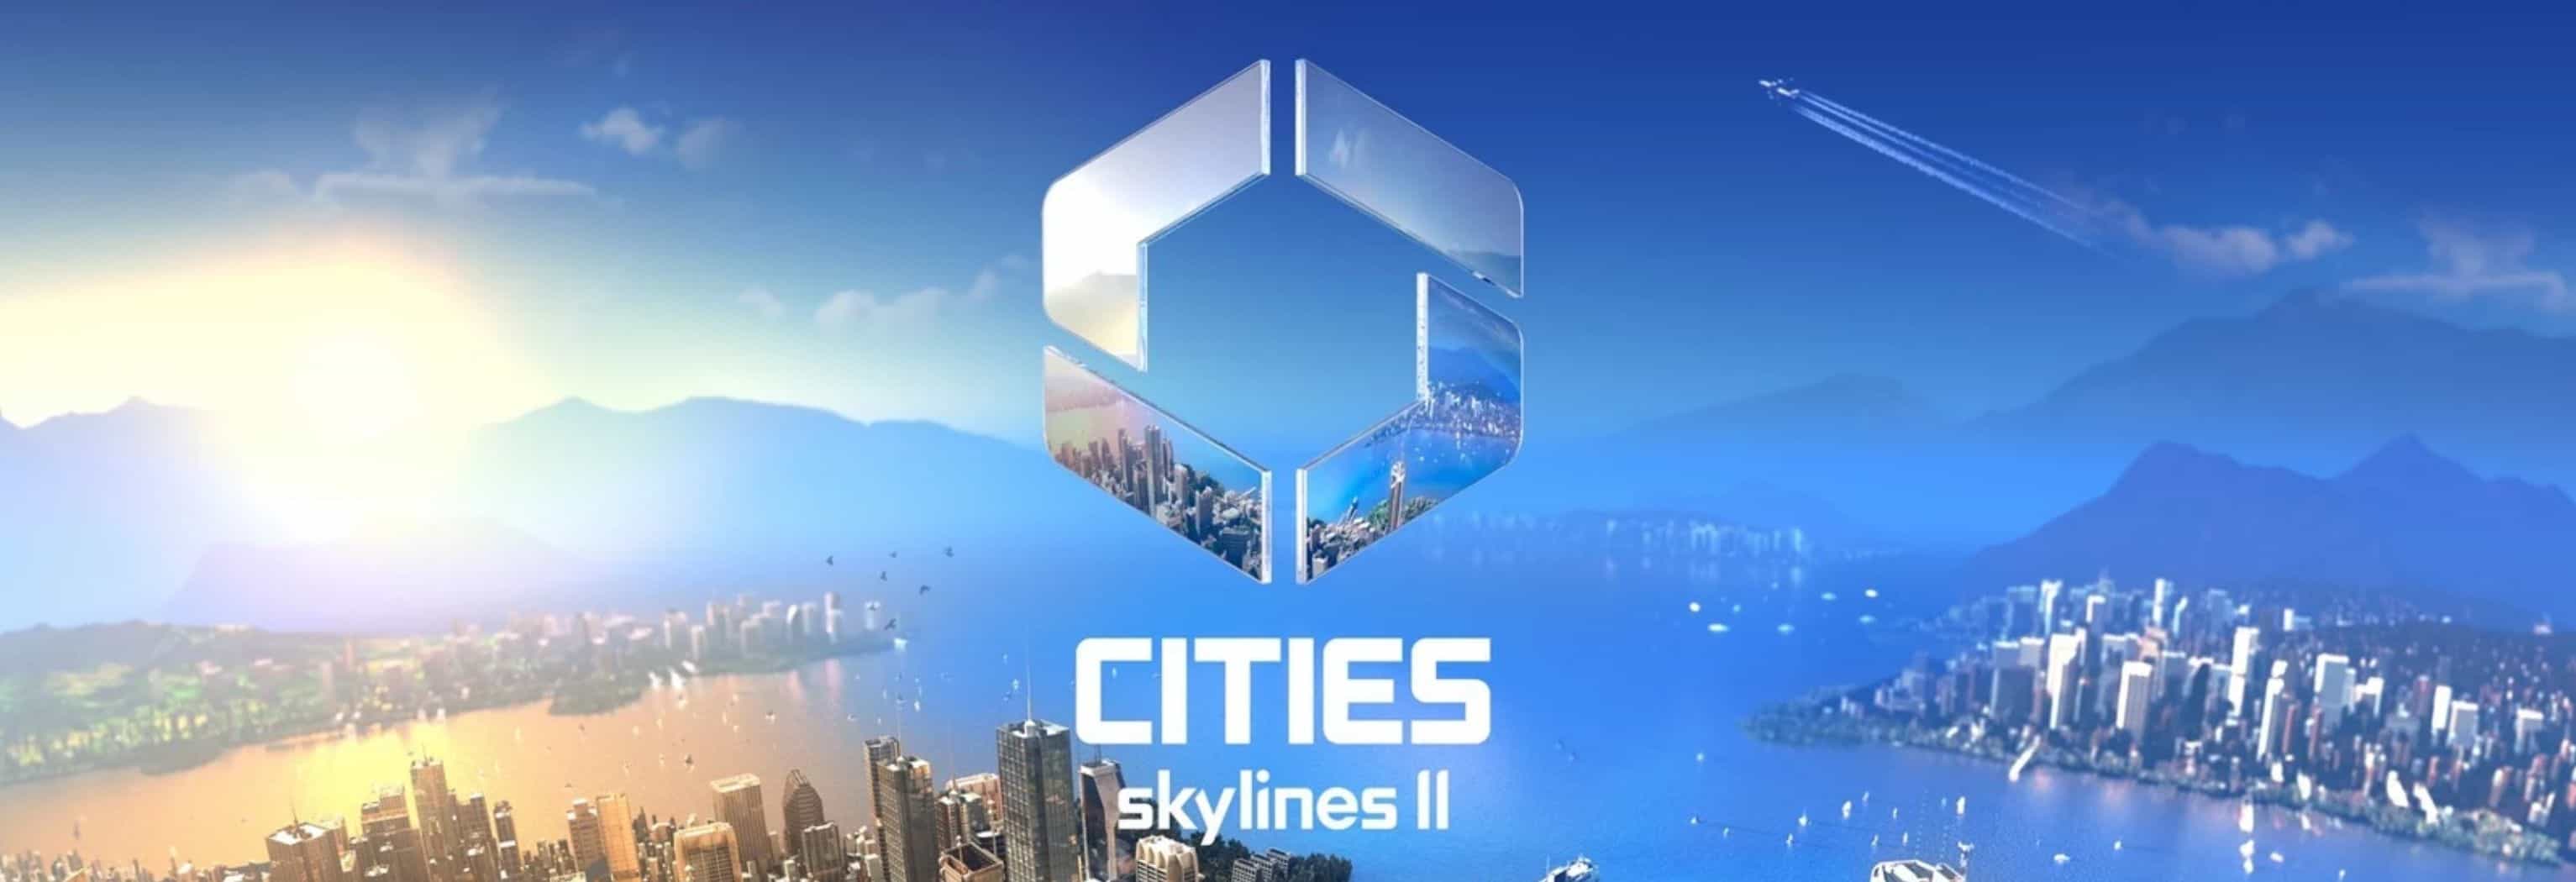 Cities Skylines 2 PC requirements – Minimum & recommended specs - Dexerto